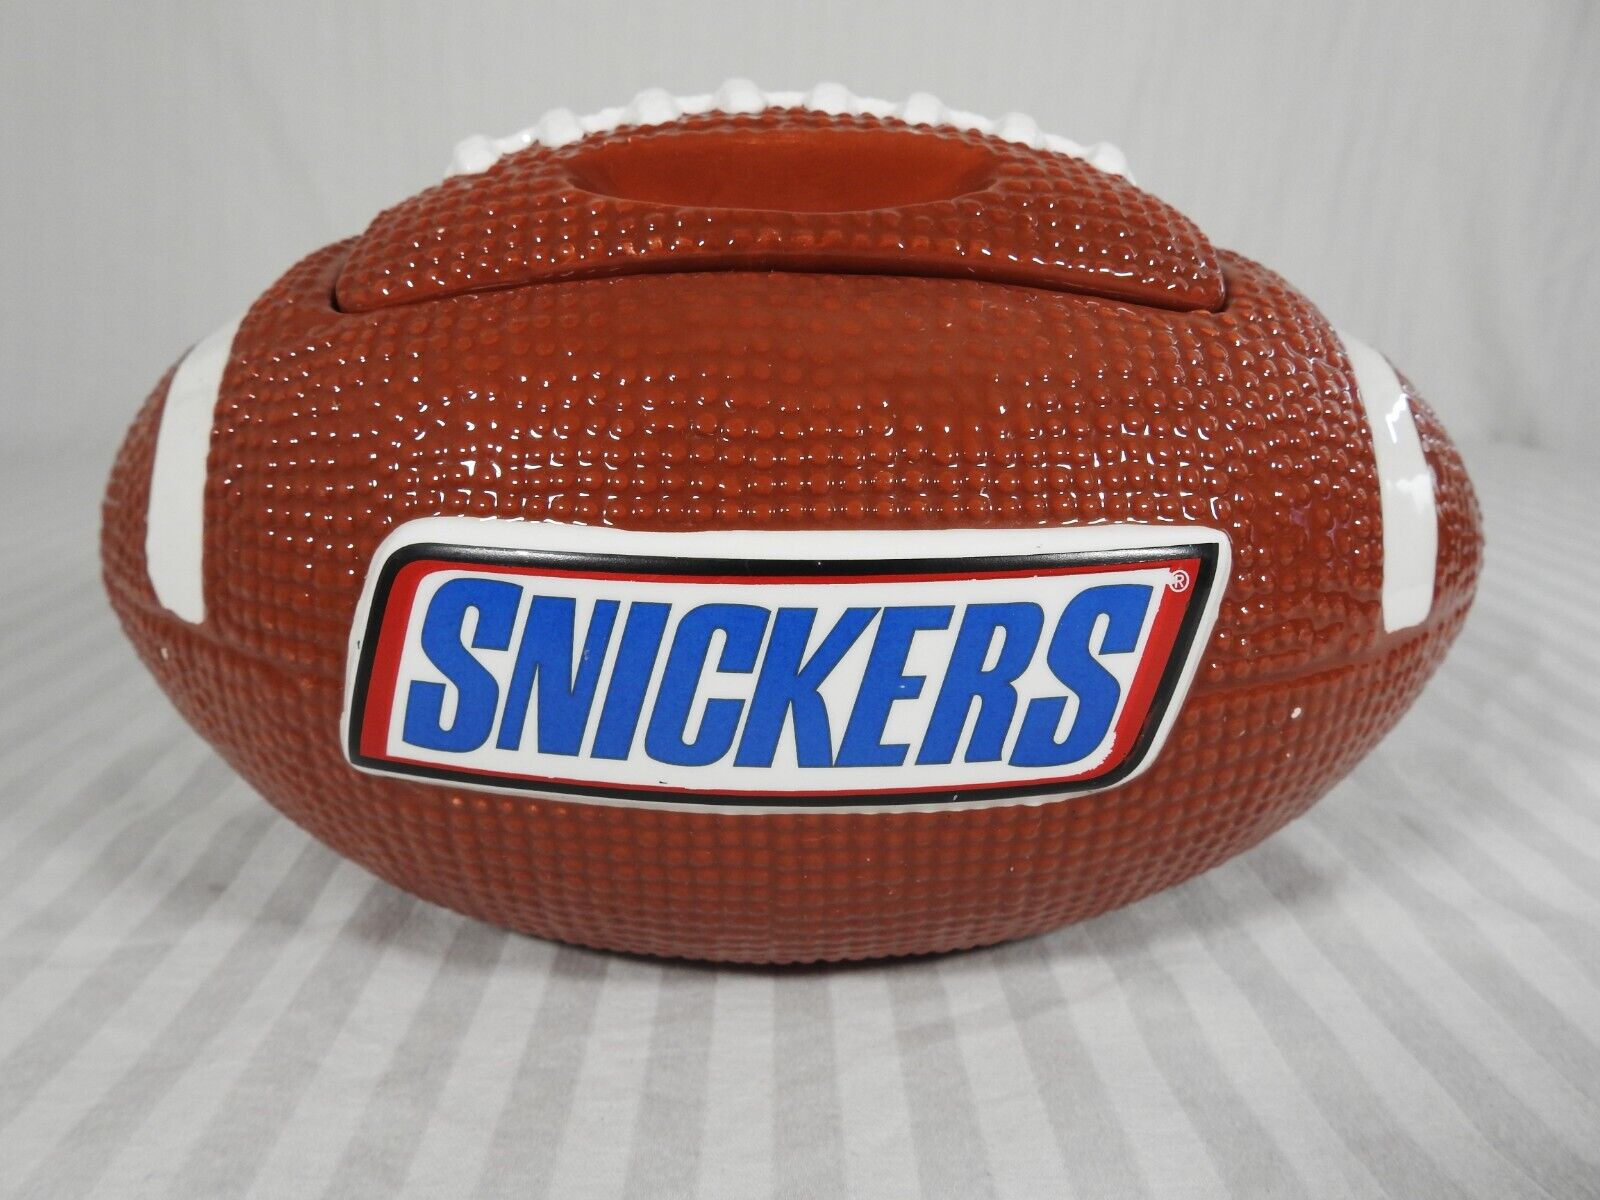 Ceramic Snickers Football Shaped Cookie/Candy Jar. Game Day Party. Galerie.